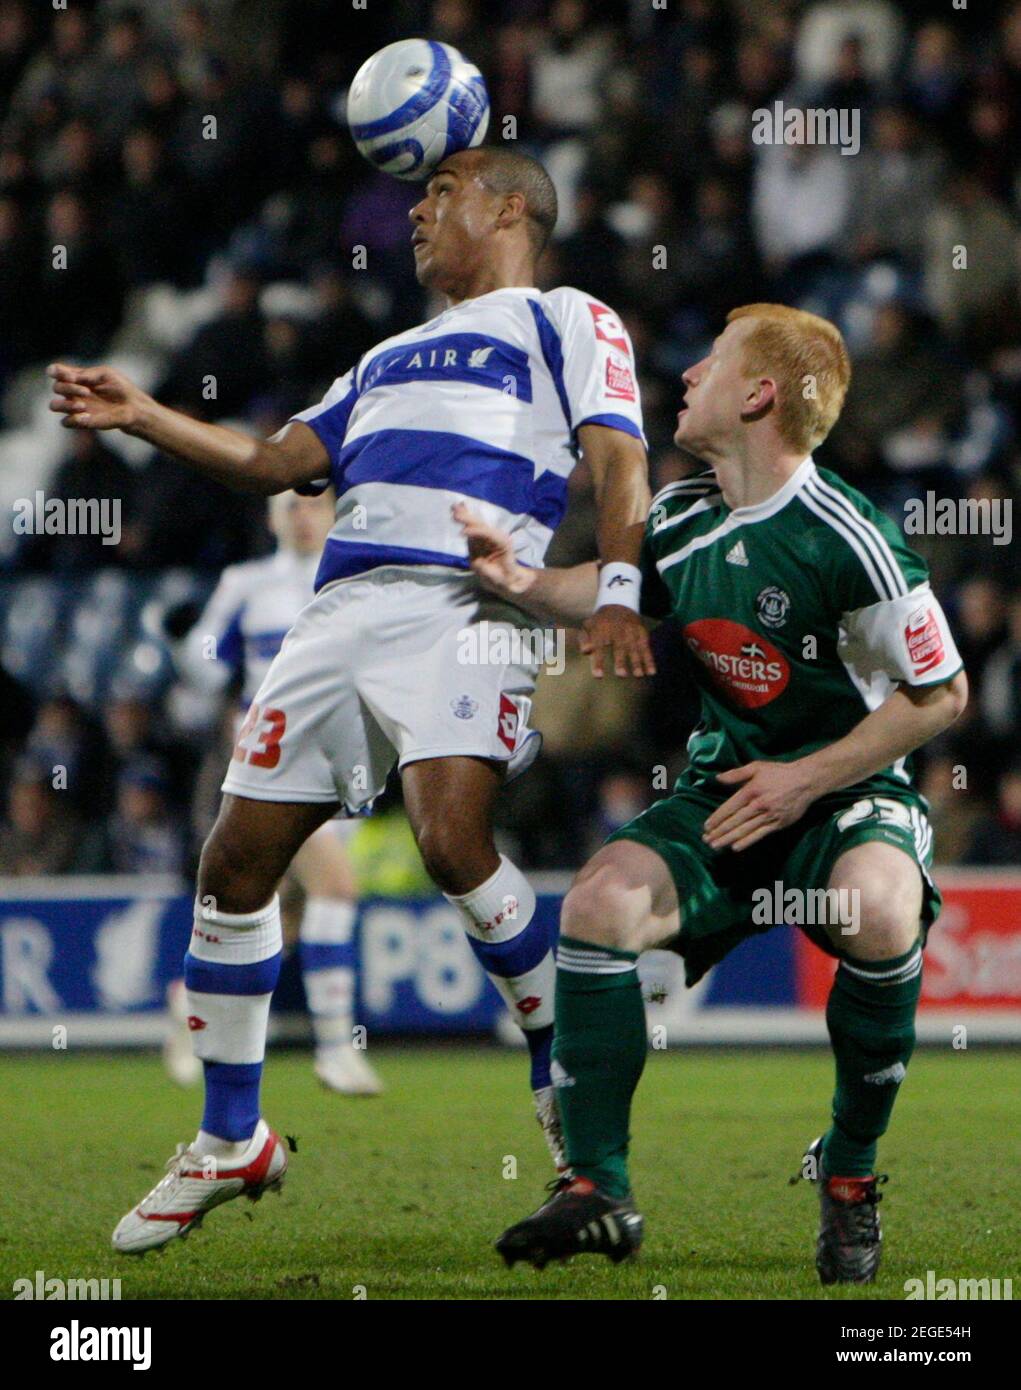 Football - Queens Park Rangers v Plymouth Argyle - Coca-Cola Football League Championship - Loftus Road - 09/10 - 9/3/10  Jay Simpson (L) - Queens Park Rangers in action against Richard Eckersley - Plymouth Argyle  Mandatory Credit: Action Images / Peter Cziborra Stock Photo